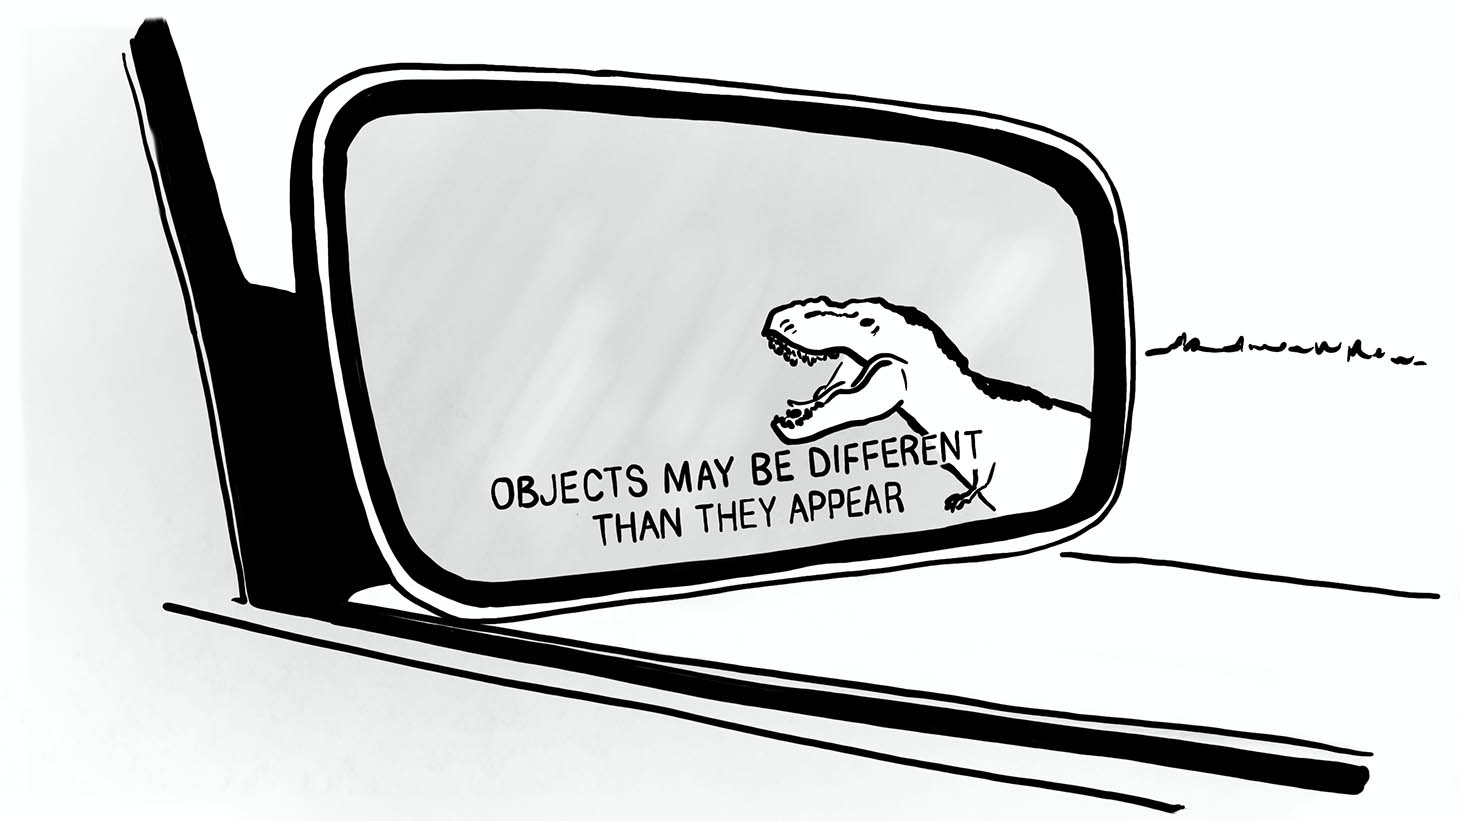 A mirror warns, "Objects may be different than they appear." A dinosaur peeks into the mirror